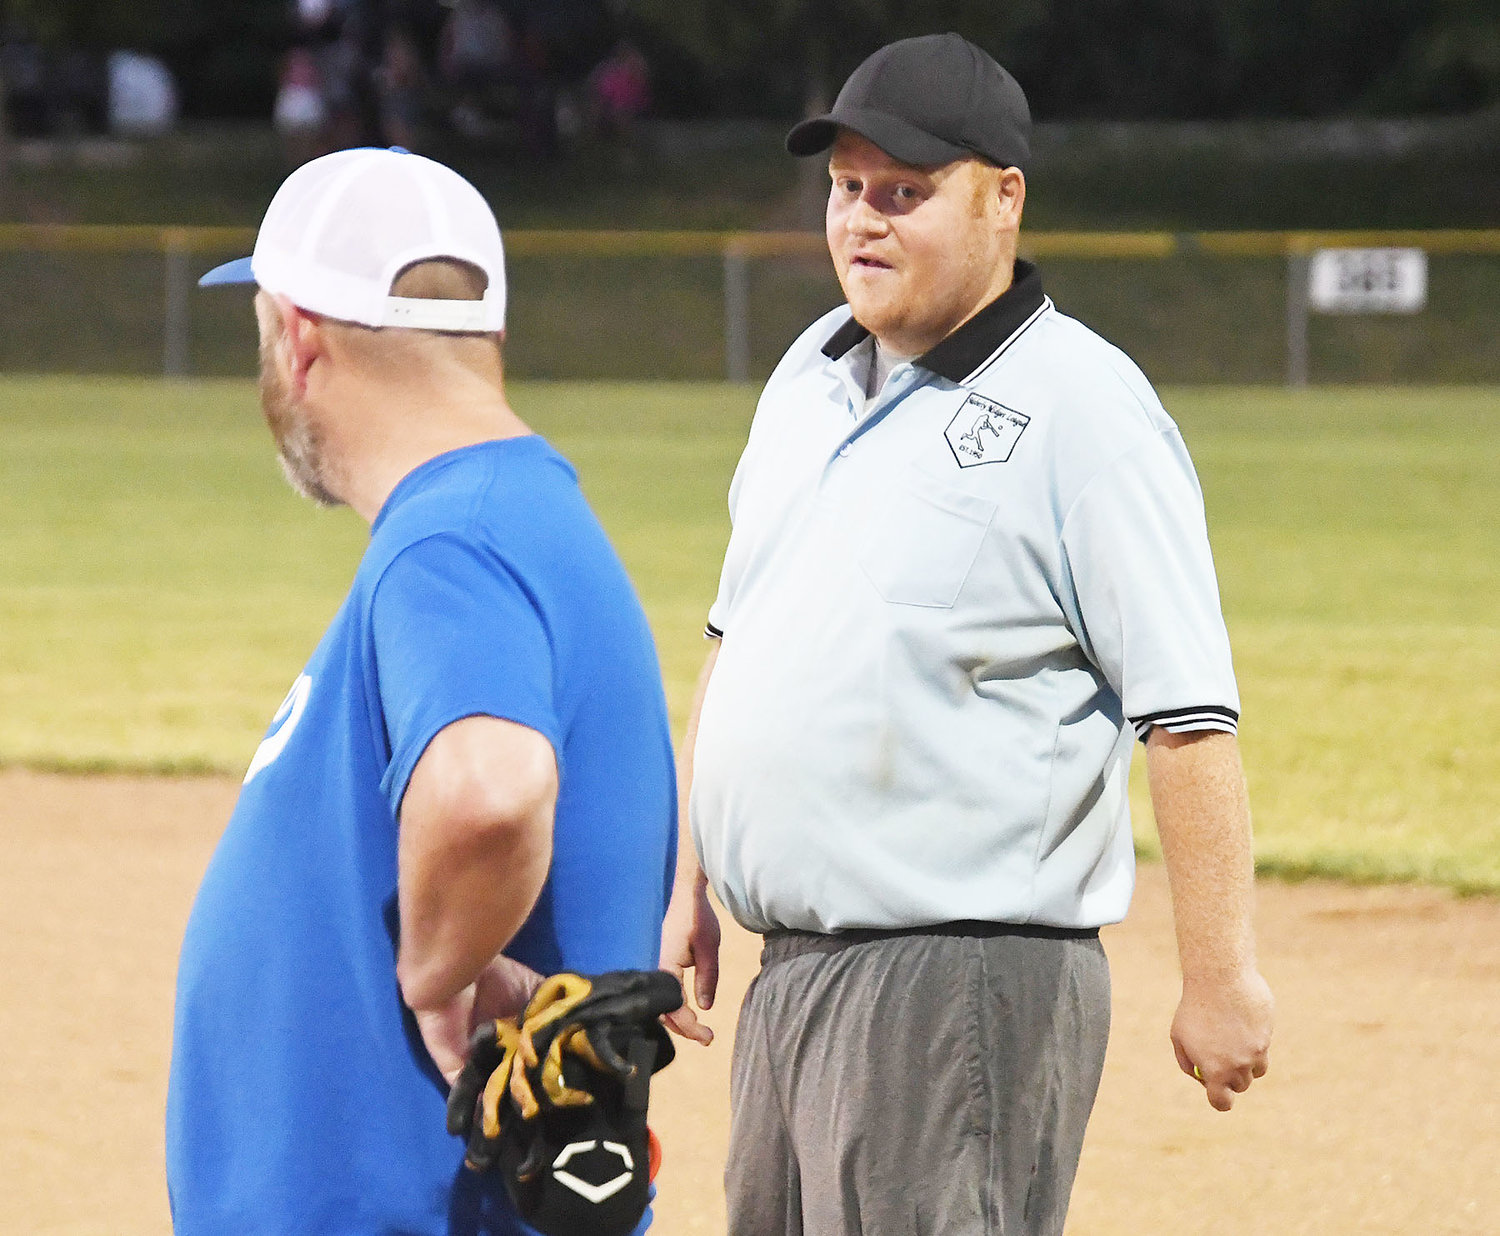 Bombers' assistant coach Steve Wilson shares a moment with infield umpire Calvin Huntsman.